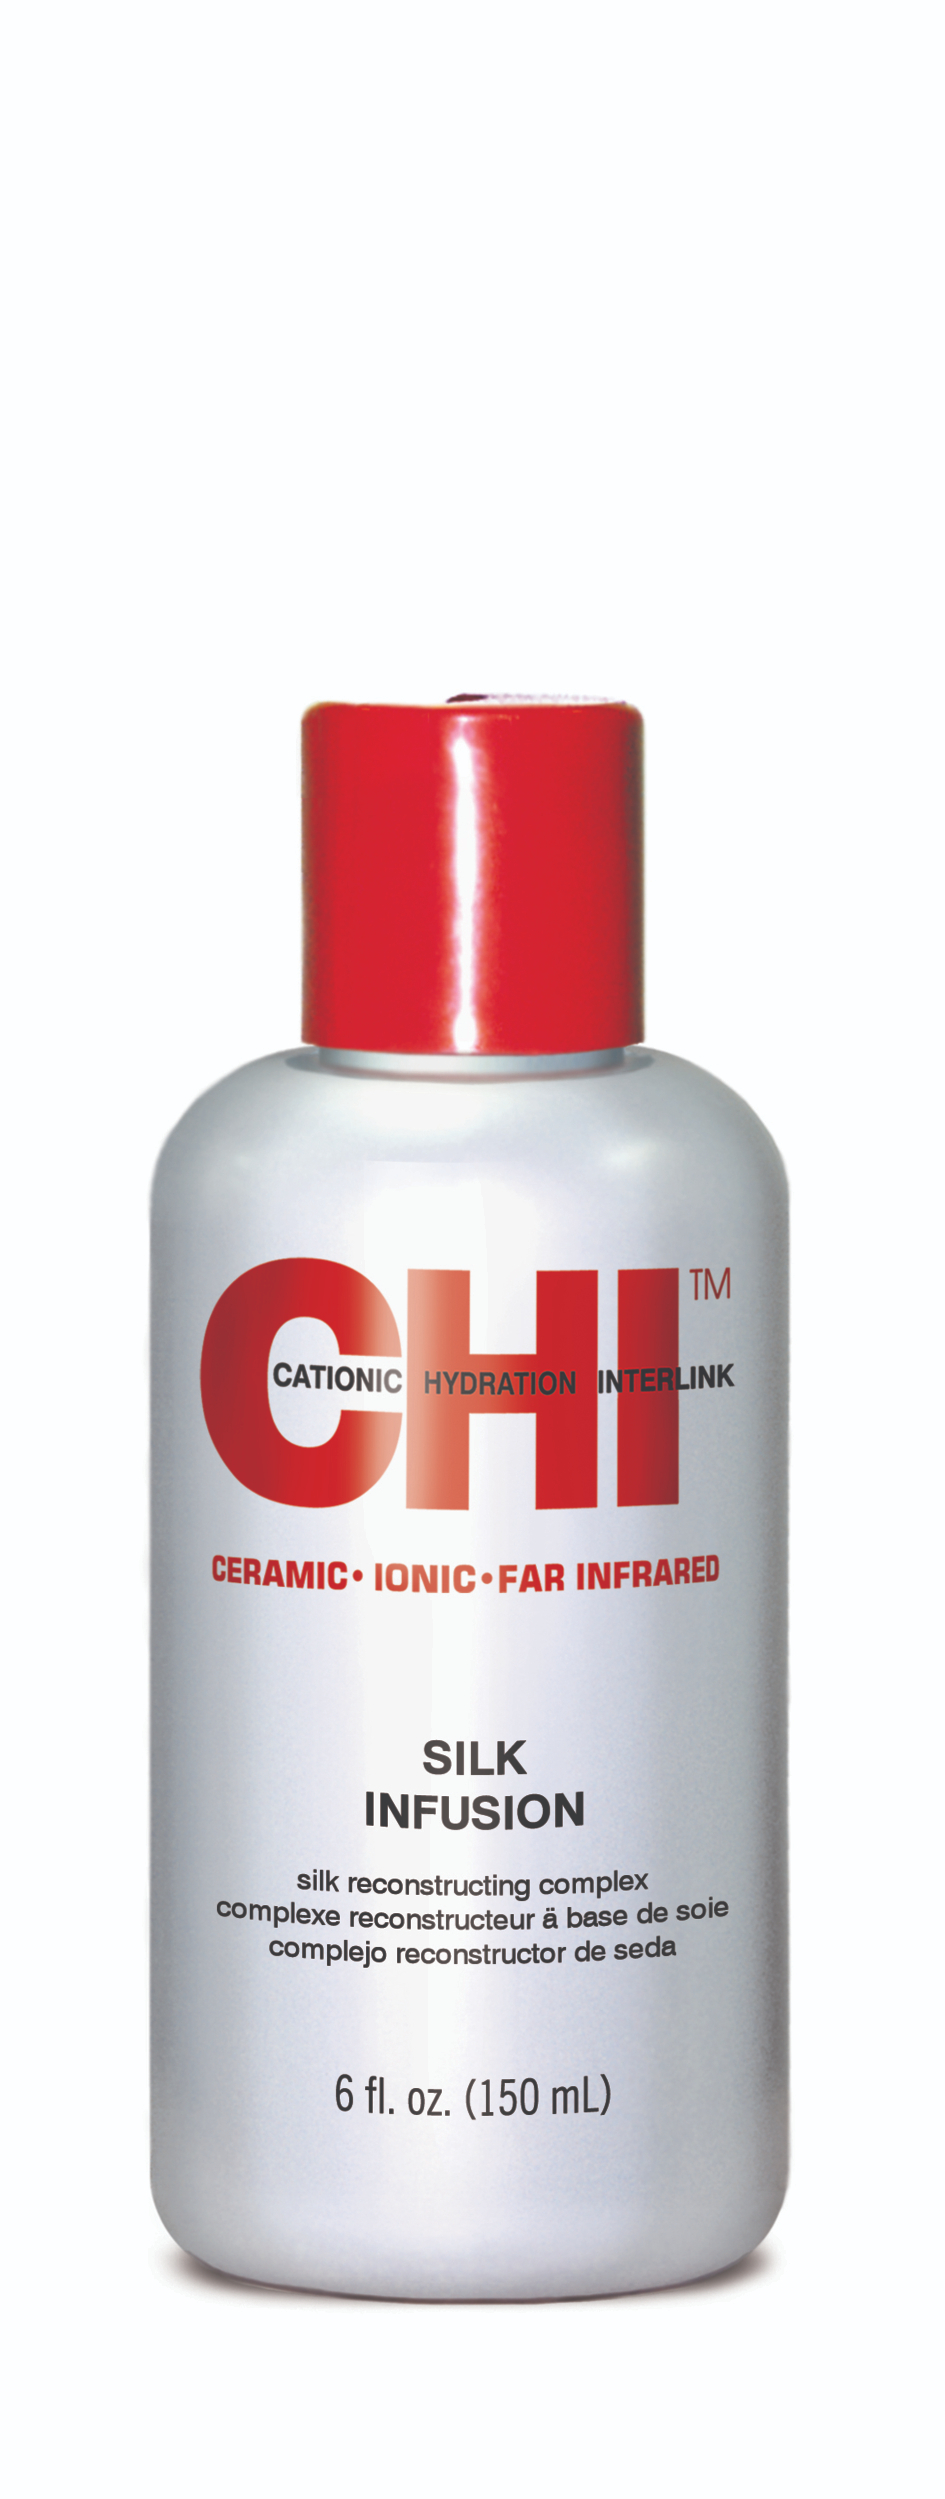 Chi Infra silk infusion reconstructing complex